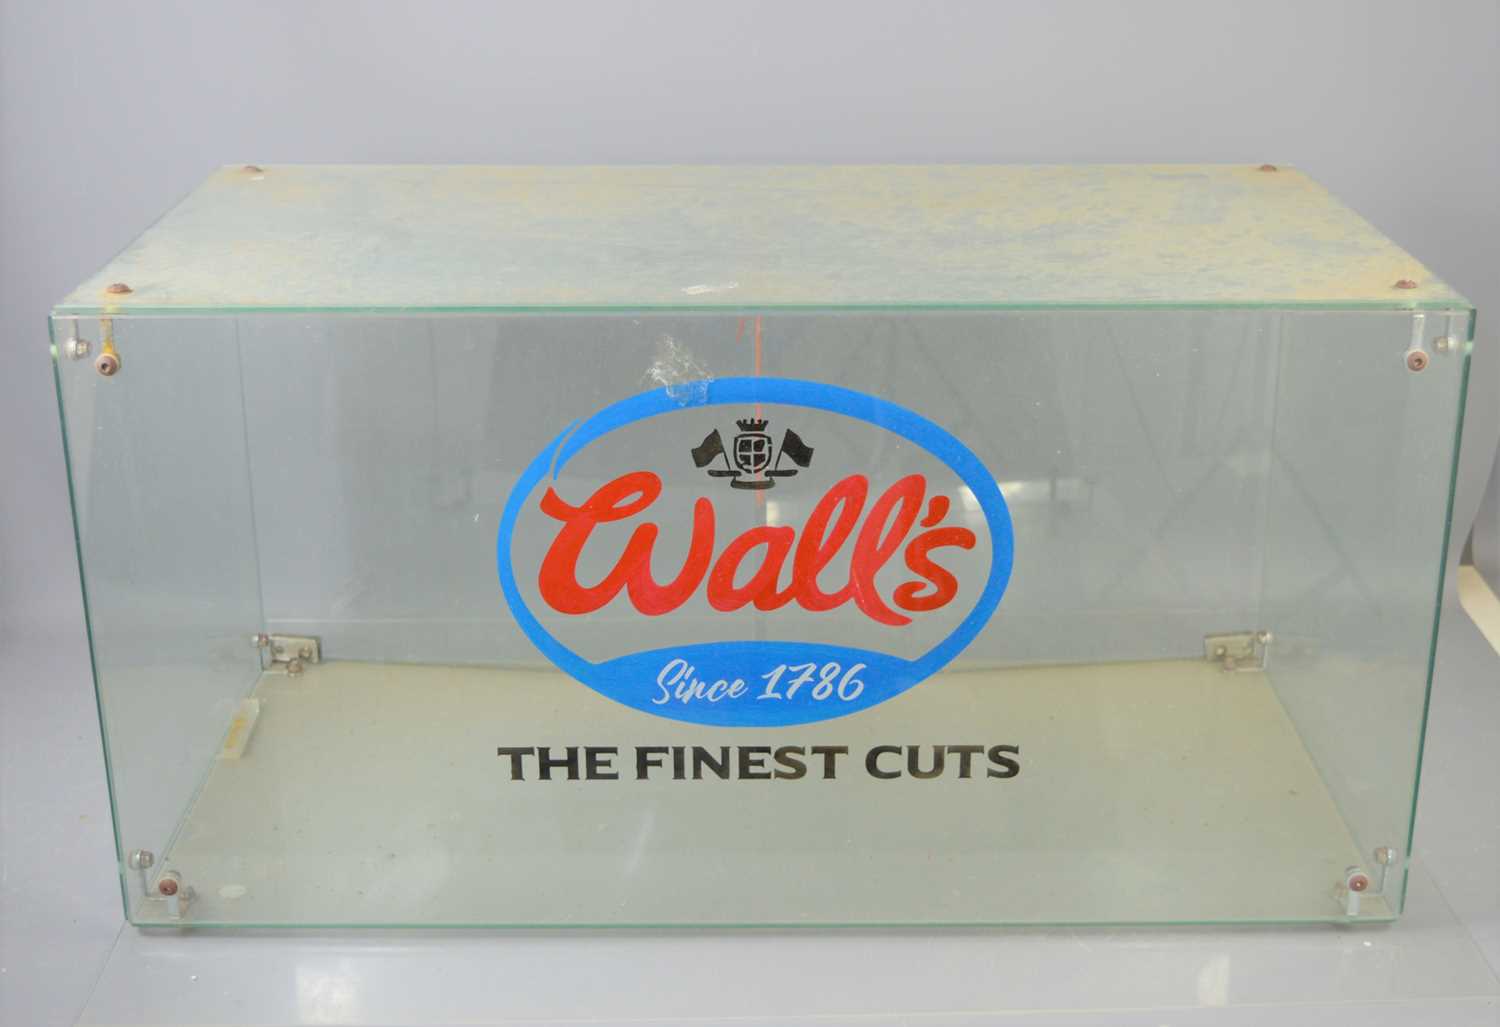 Lot 124 - A Wall's glass counter top display cabinet.